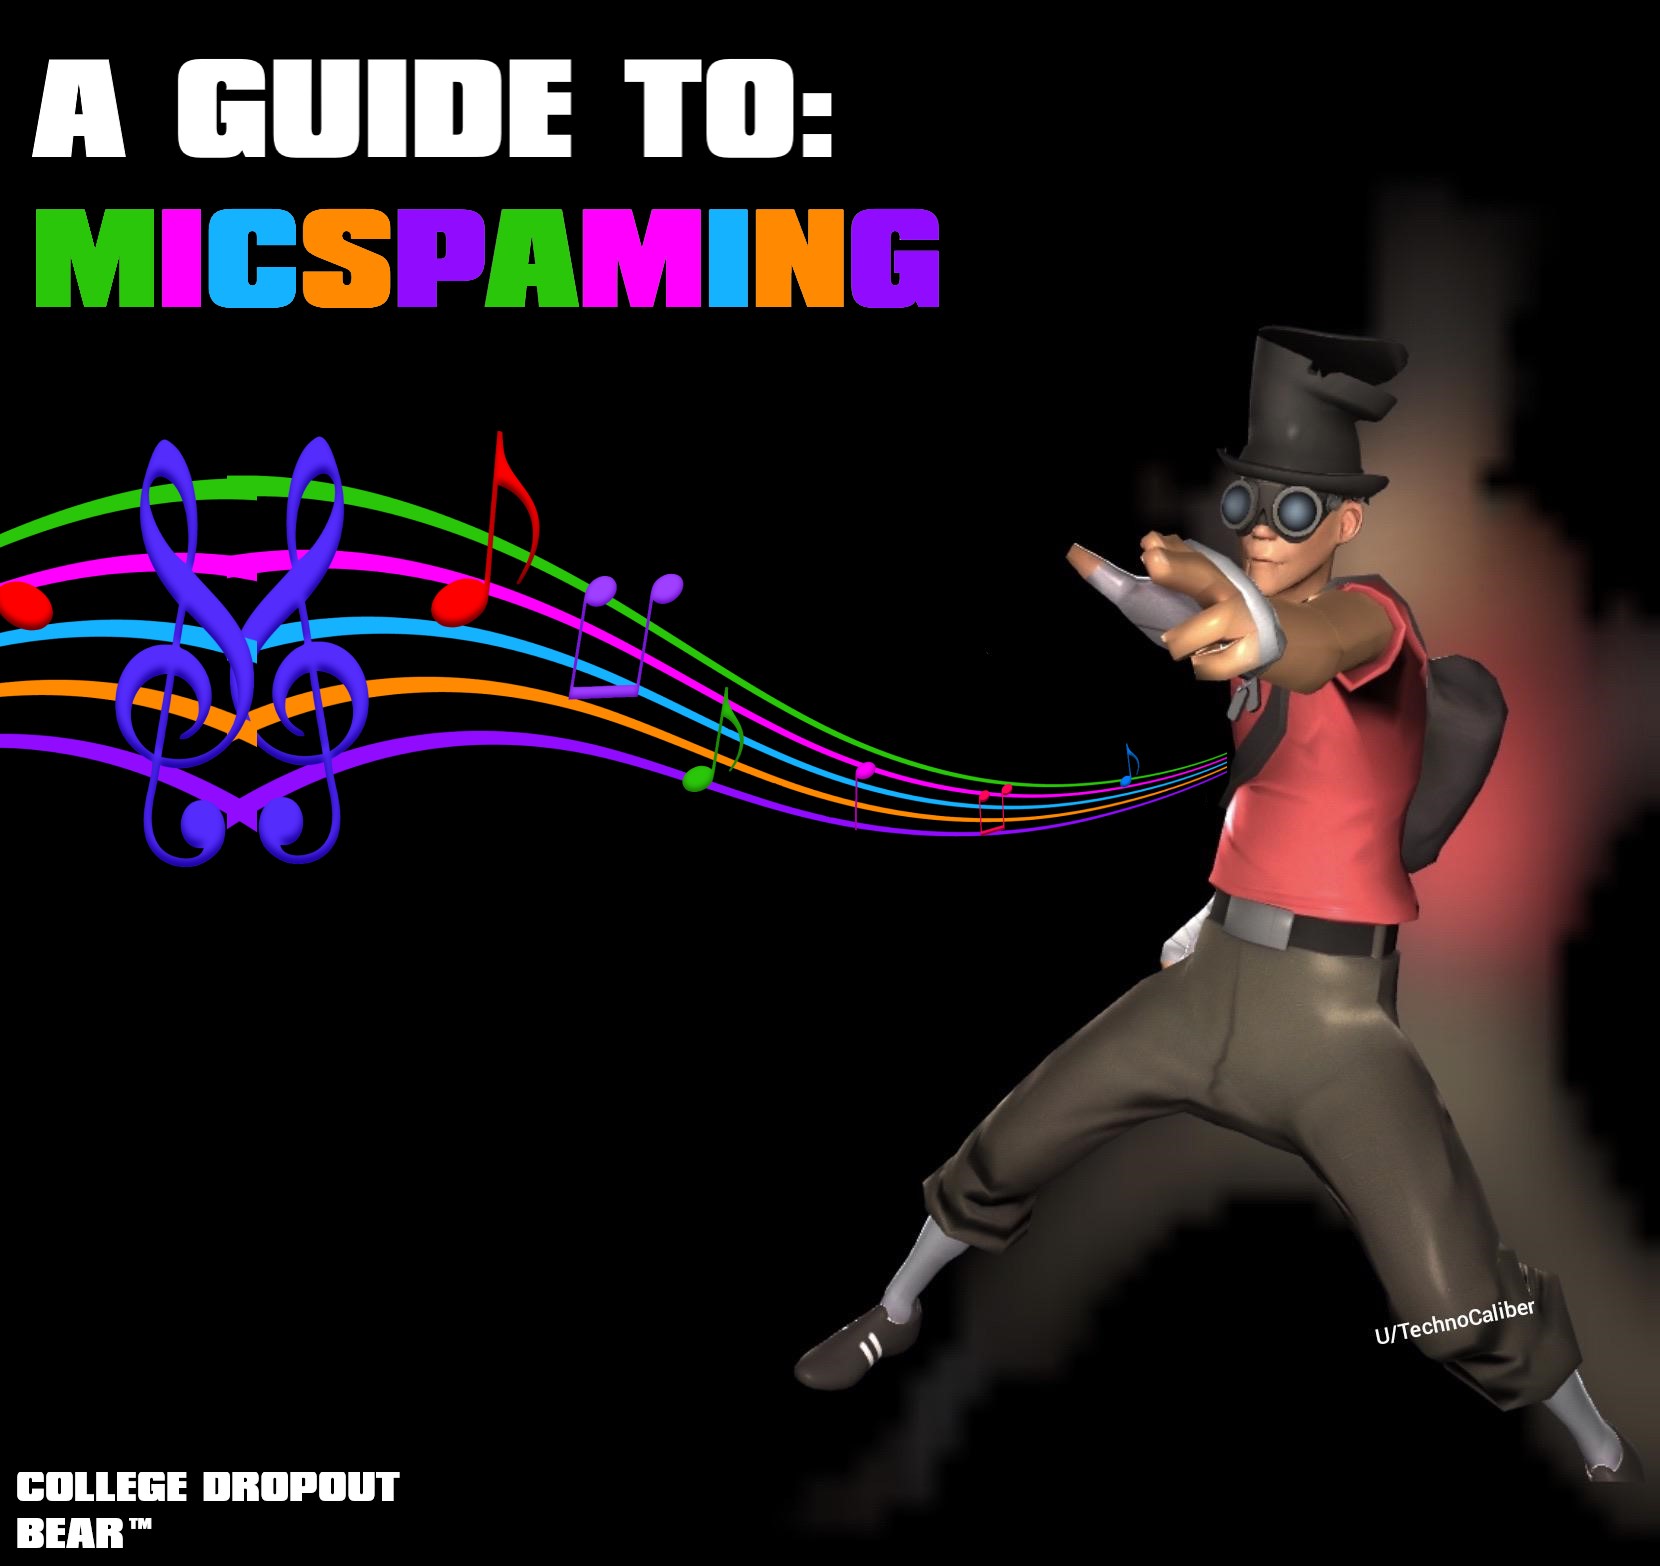 Team Fortress 2 How to play media (micspam) [FREE!]